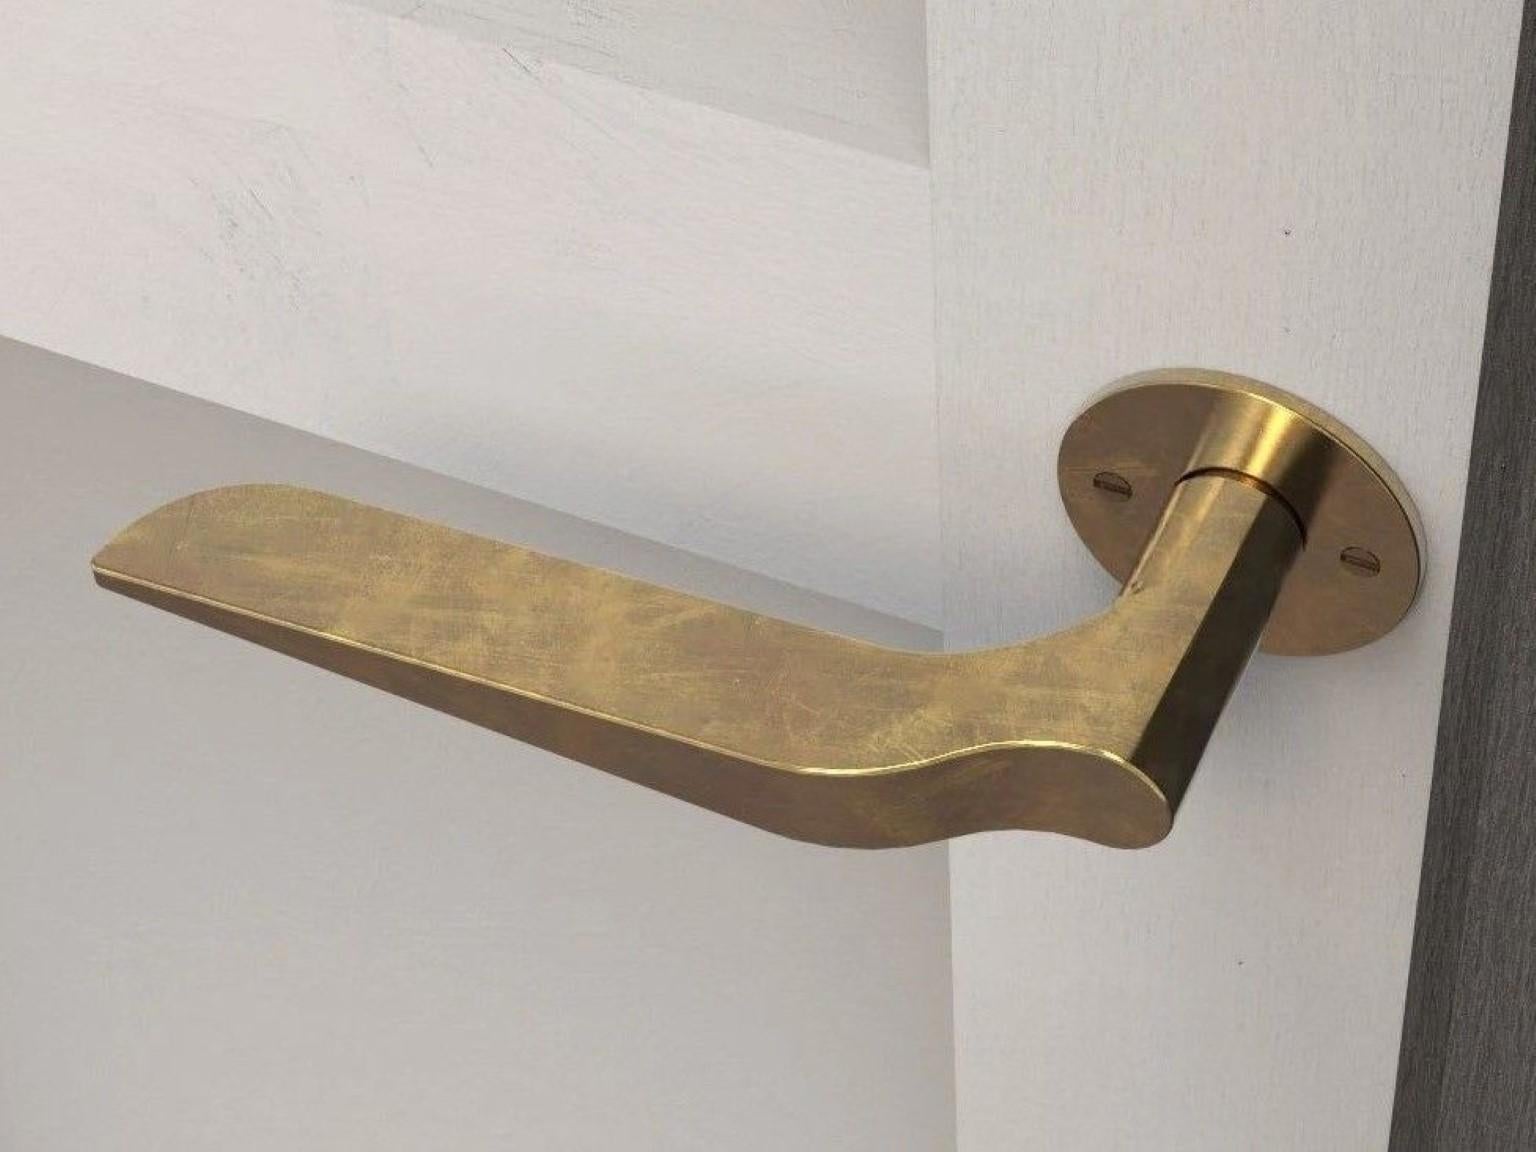 Brass Palais Door Handle by Henry Wilson
Dimensions: W 13 x D 8 x H 2 cm
Materials: Brass

Palais lever handle in high tensile brass or aluminium. Each handle is individually investment cast from a wax positive, vibration polished and machined. For